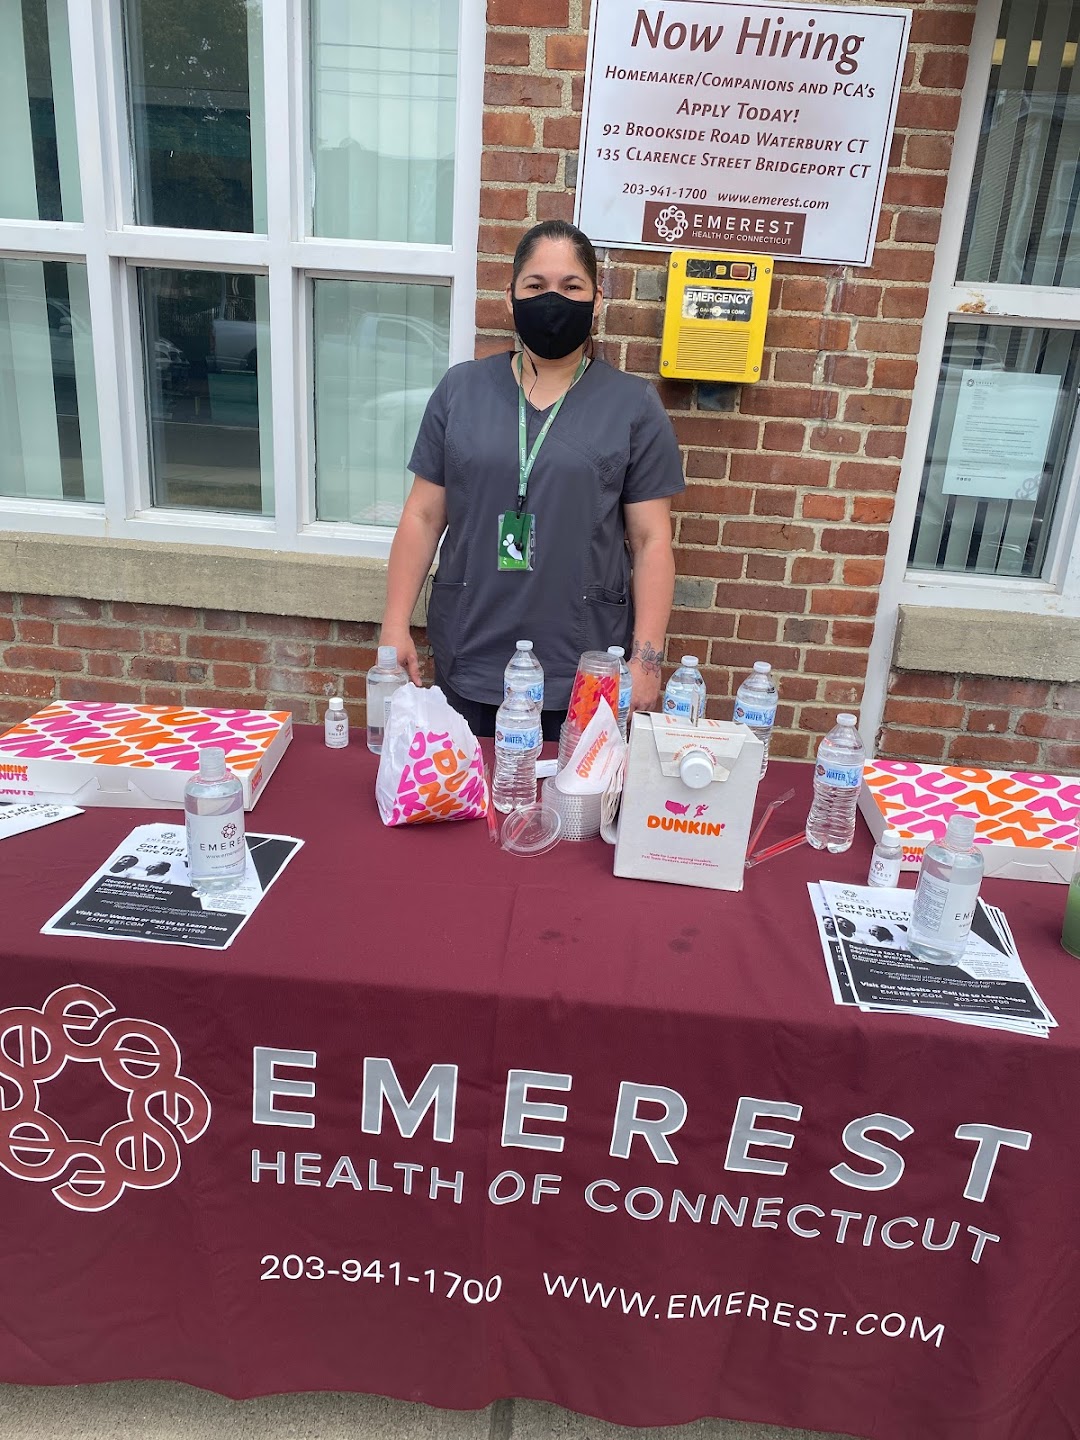 Emerest Health of Connecticut Home Care Agency